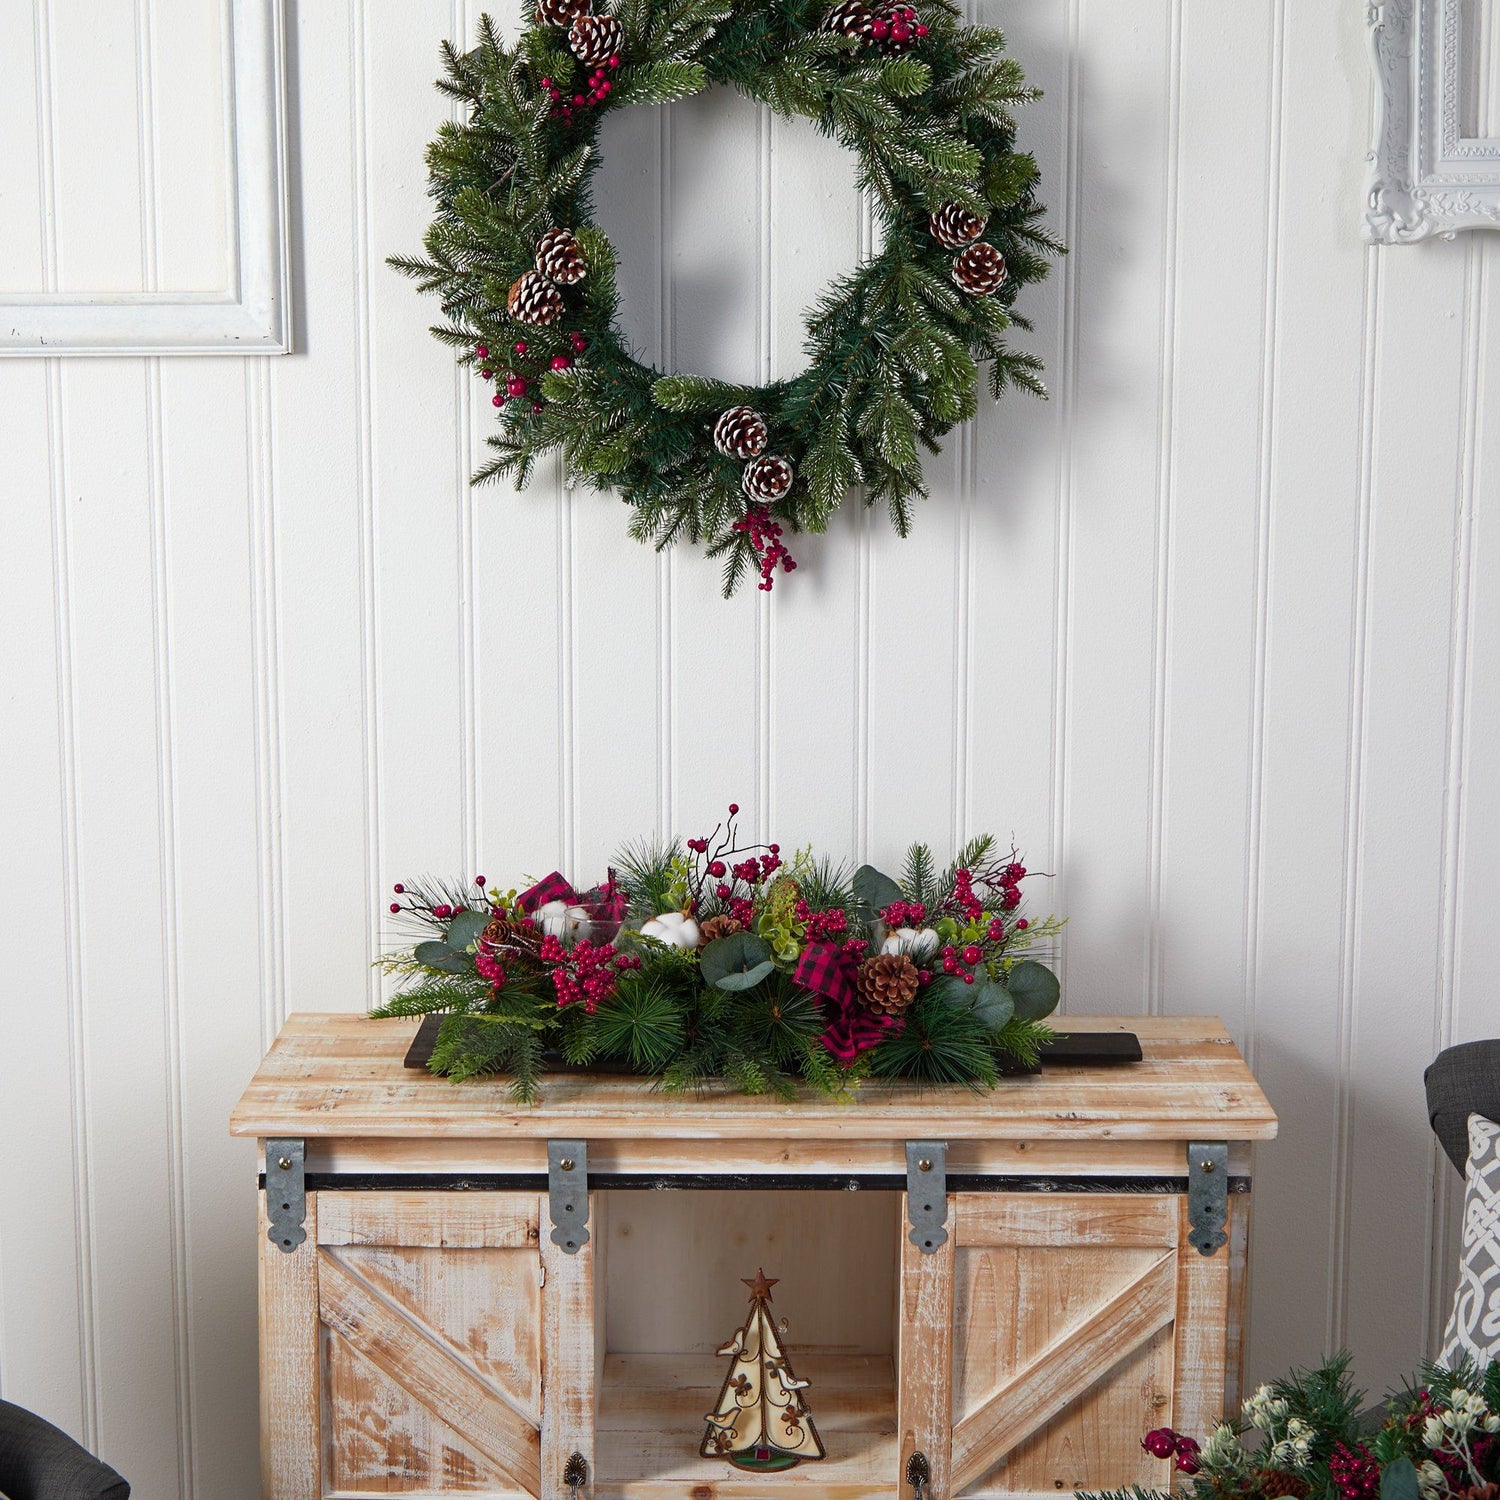 24” Holiday Berries, Pinecones and Eucalyptus Cutting Board Wall Décor or Table Arrangement